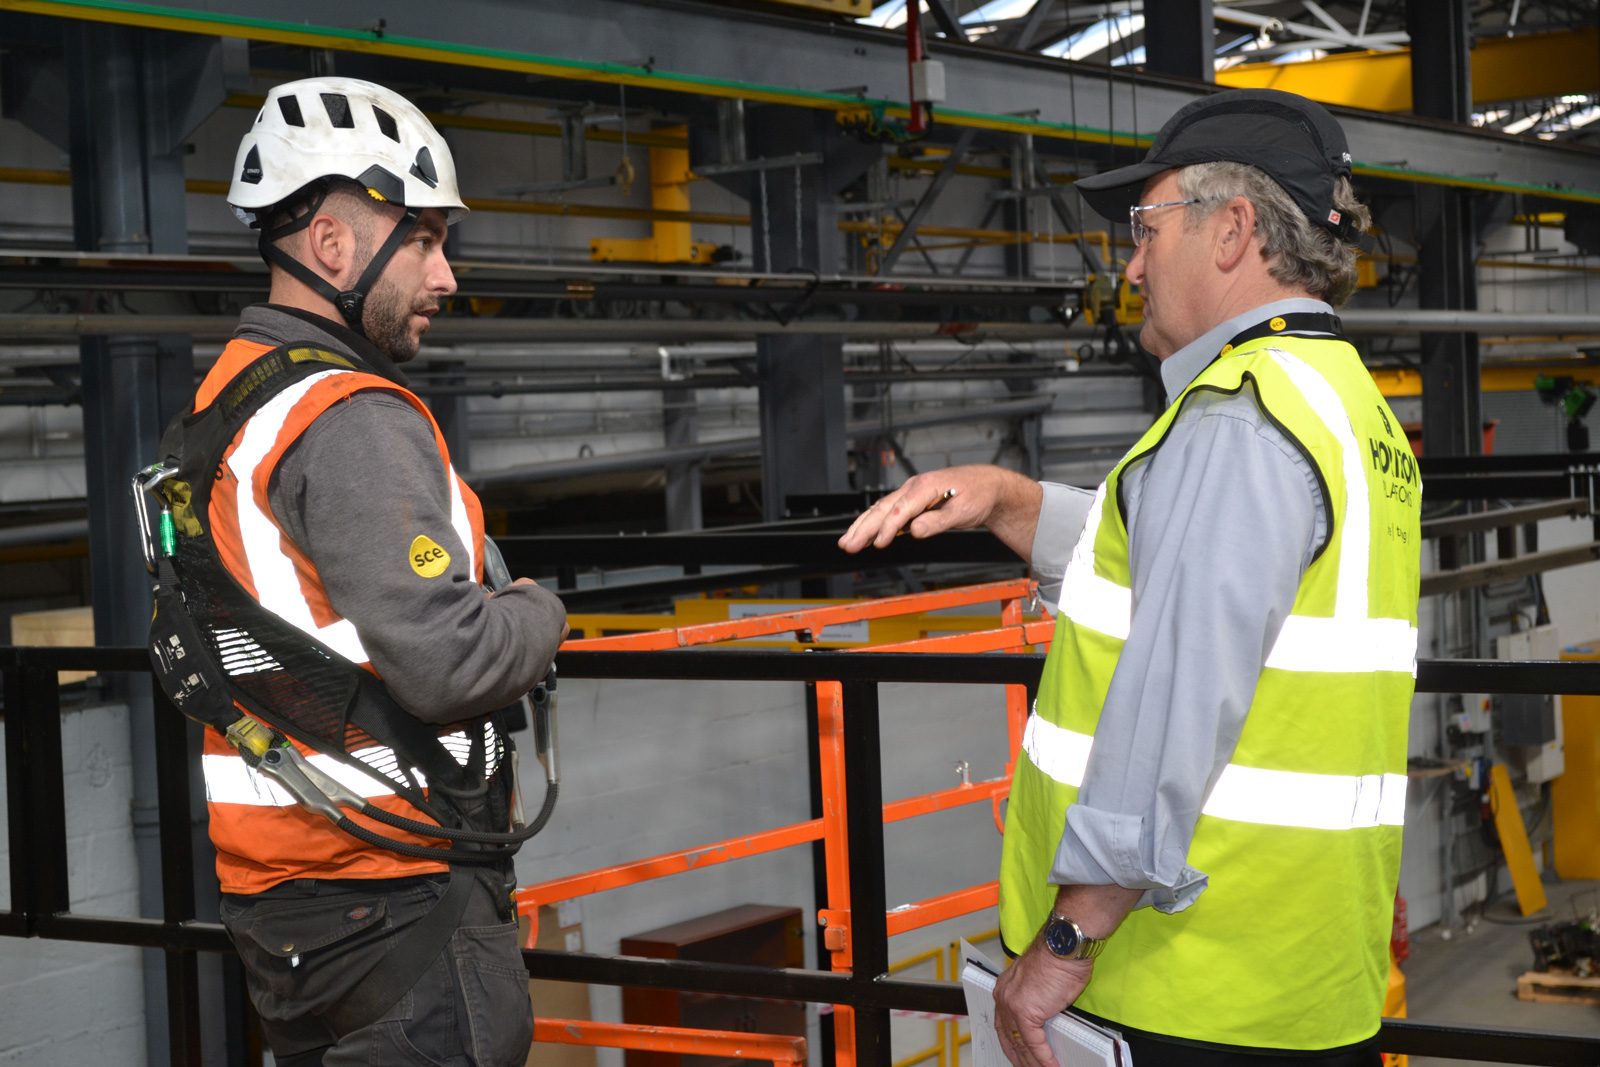 UK Providers of Training Course on IOSH Working Safely